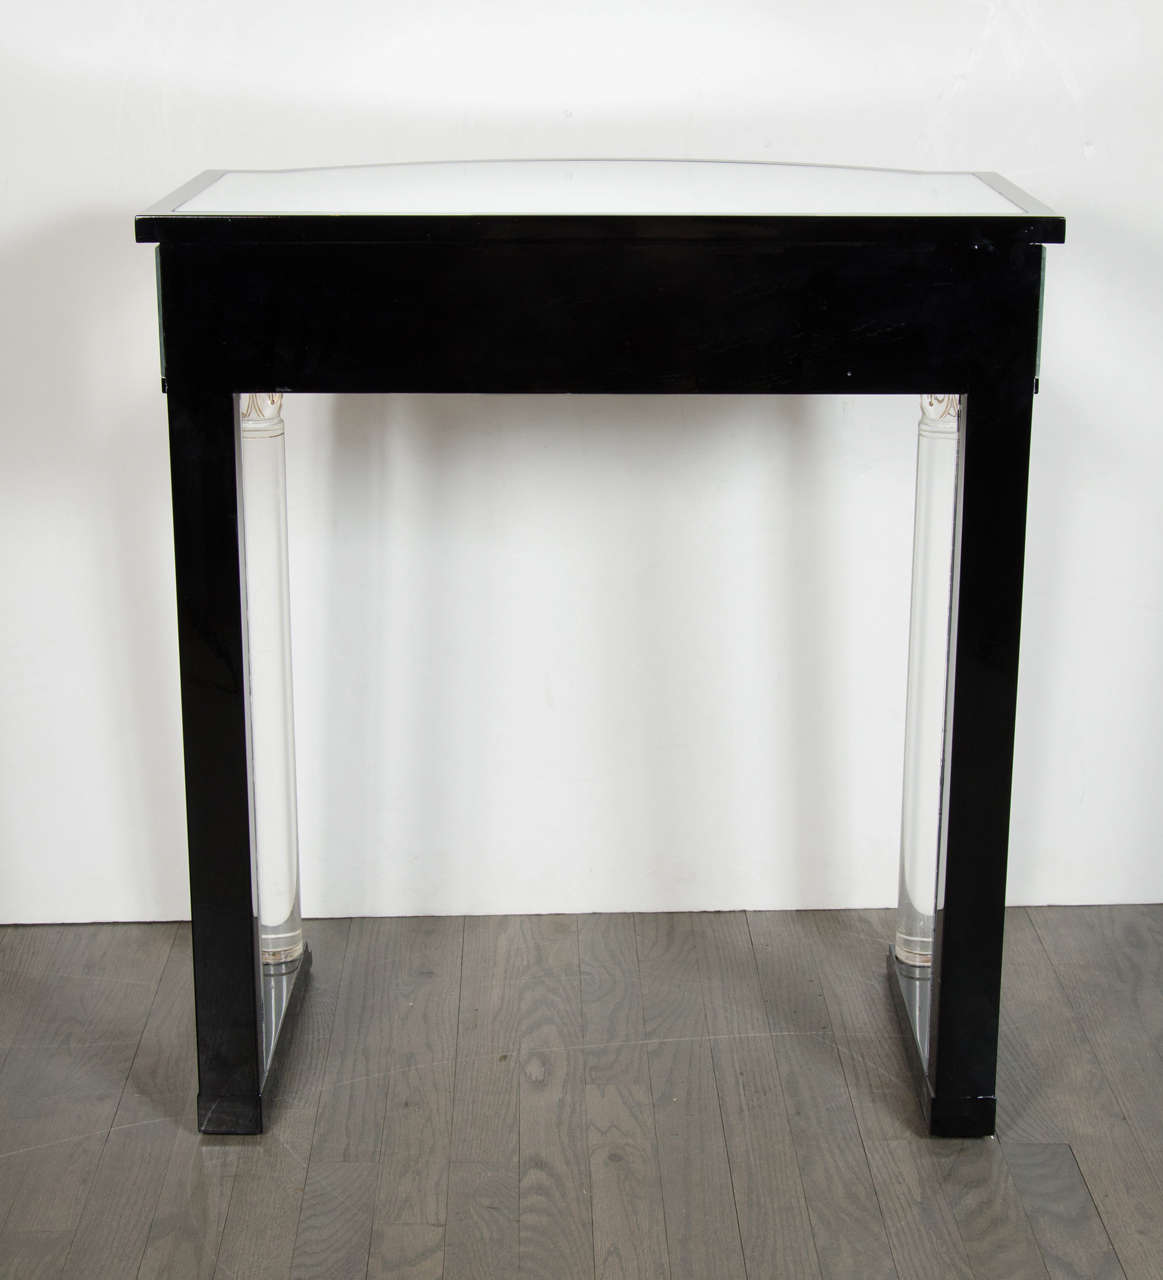 20th Century Exquisite Console Table in Ebonized Mahogany, Lucite and Mirror by Grosfeld House